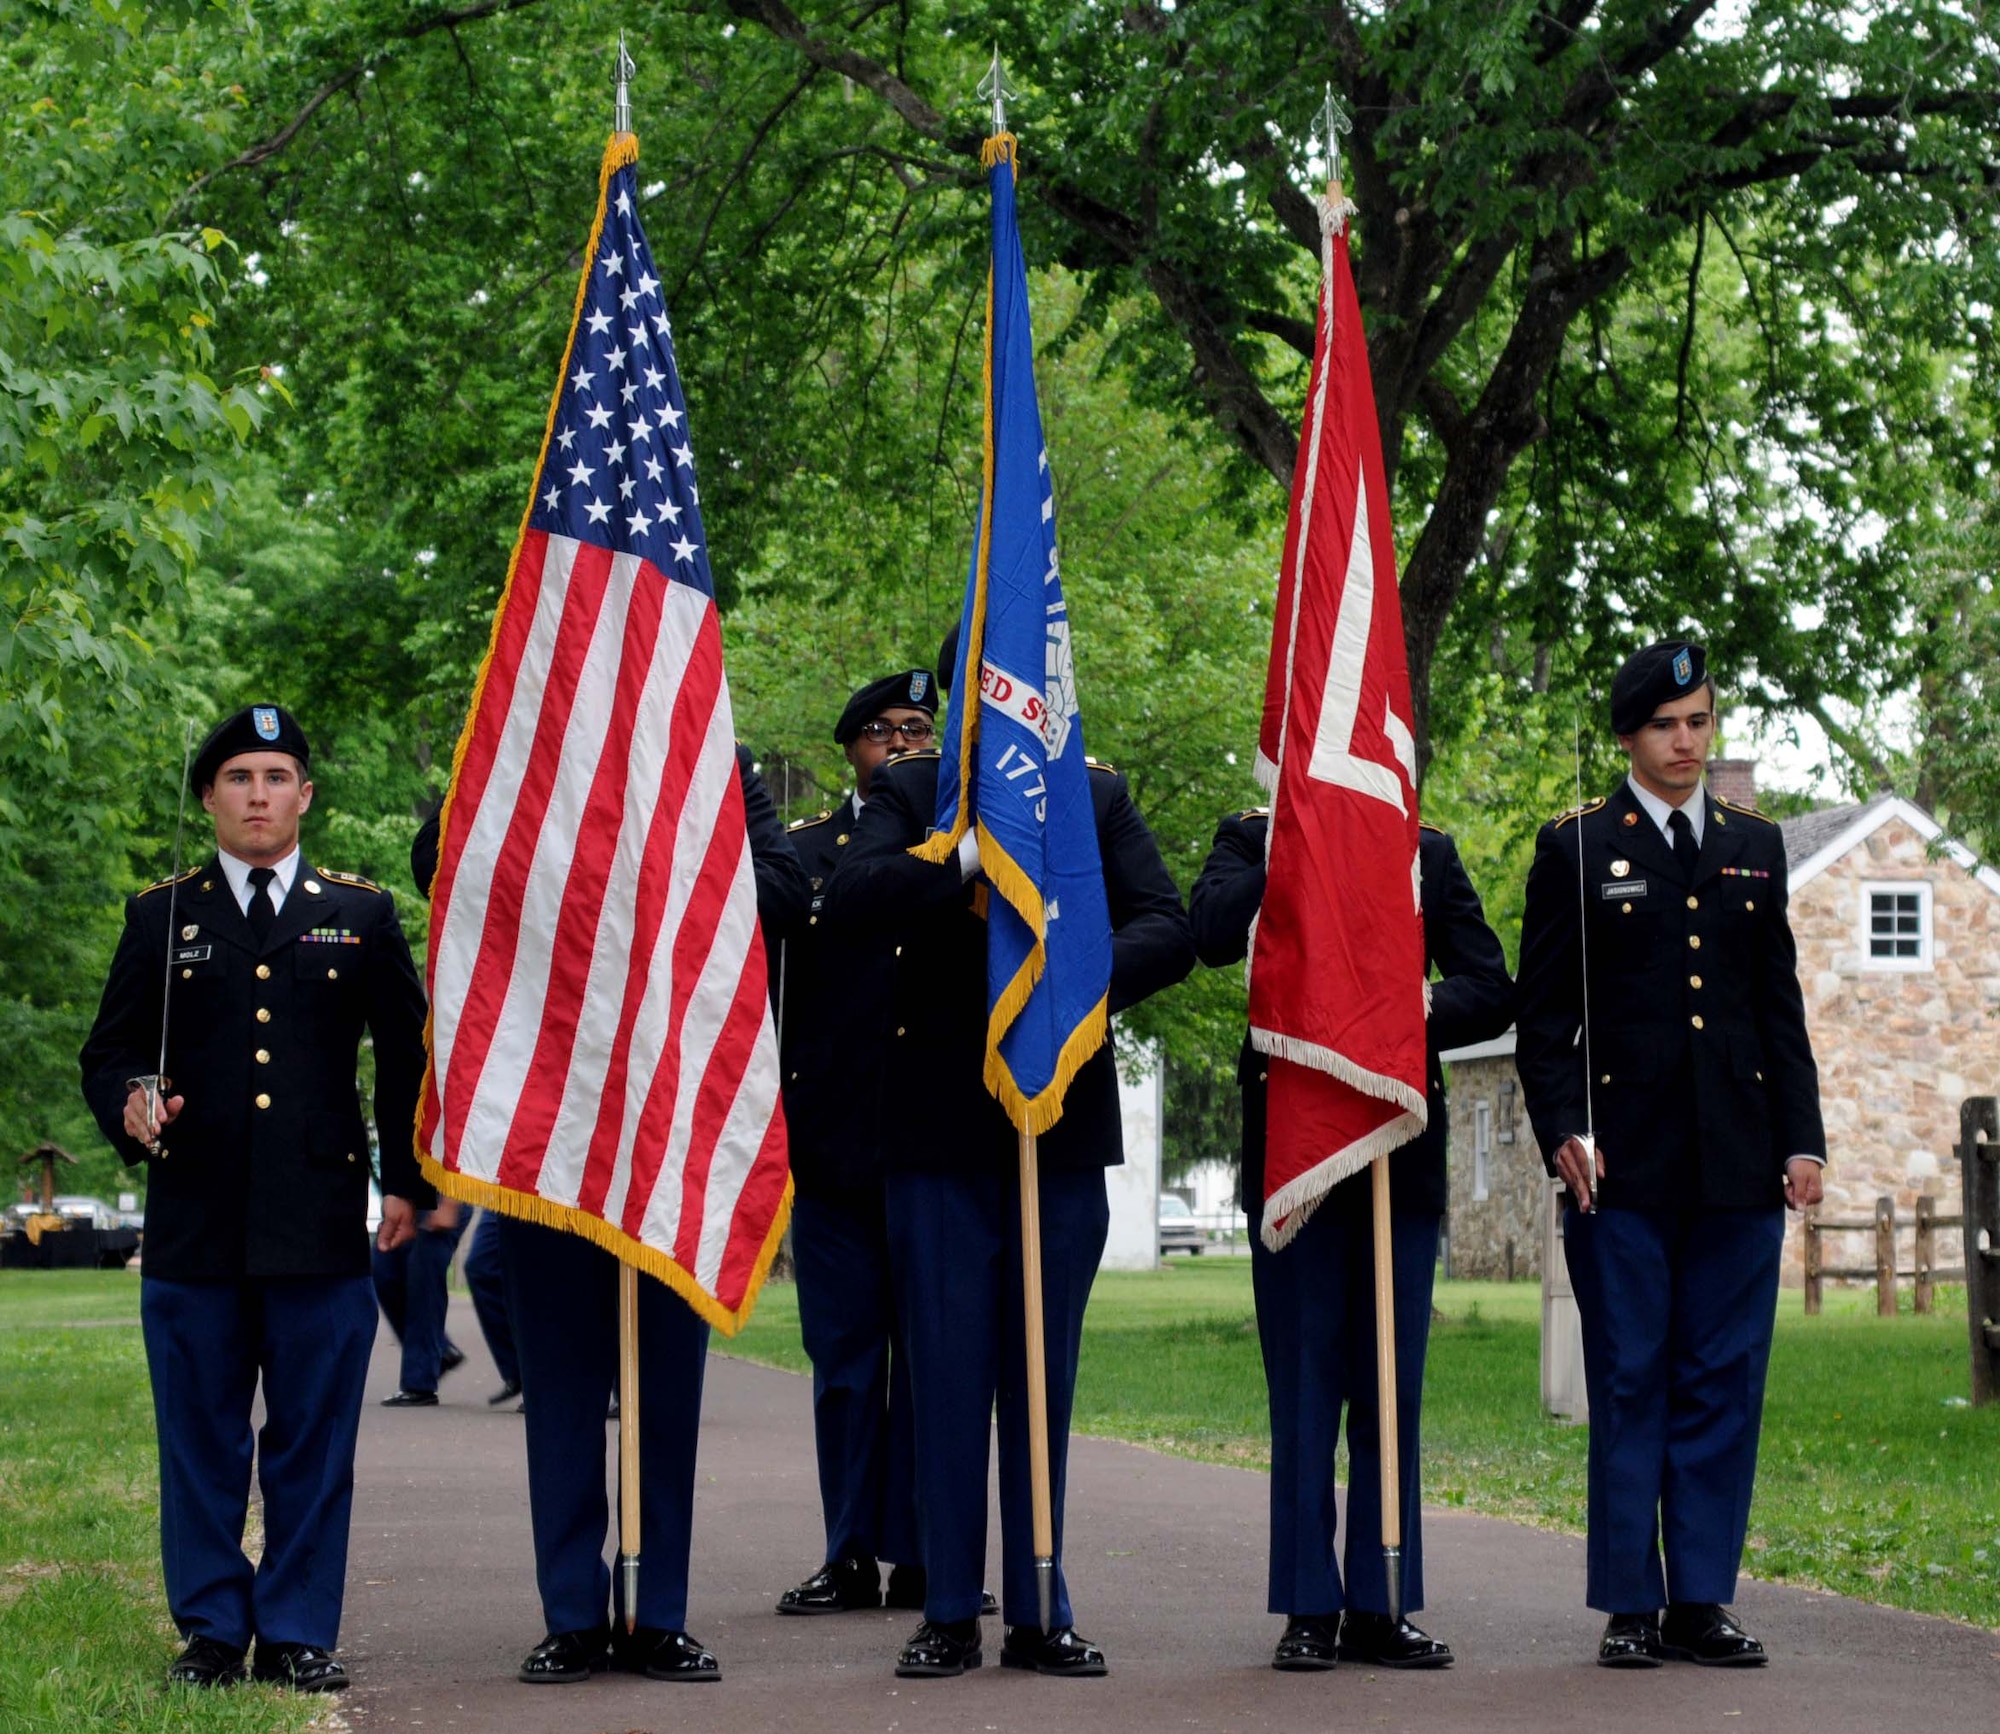 Members of the U.S. Army Reserve Officer Training Corps from Temple University, Philadelphia, present the colors during the distinguished service award dinner for retired Maj. Gen. Wesley Craig May 16, 2015, Washington Crossing Historic Park, Washington Crossing, Pennsylvania. Craig, formerly The Adjutant General of the Pennsylvania National Guard, was presented with the 2015 Mary G. Roebling Award. (U.S. Air National Guard photo by Tech. Sgt. Andria Allmond/Released)